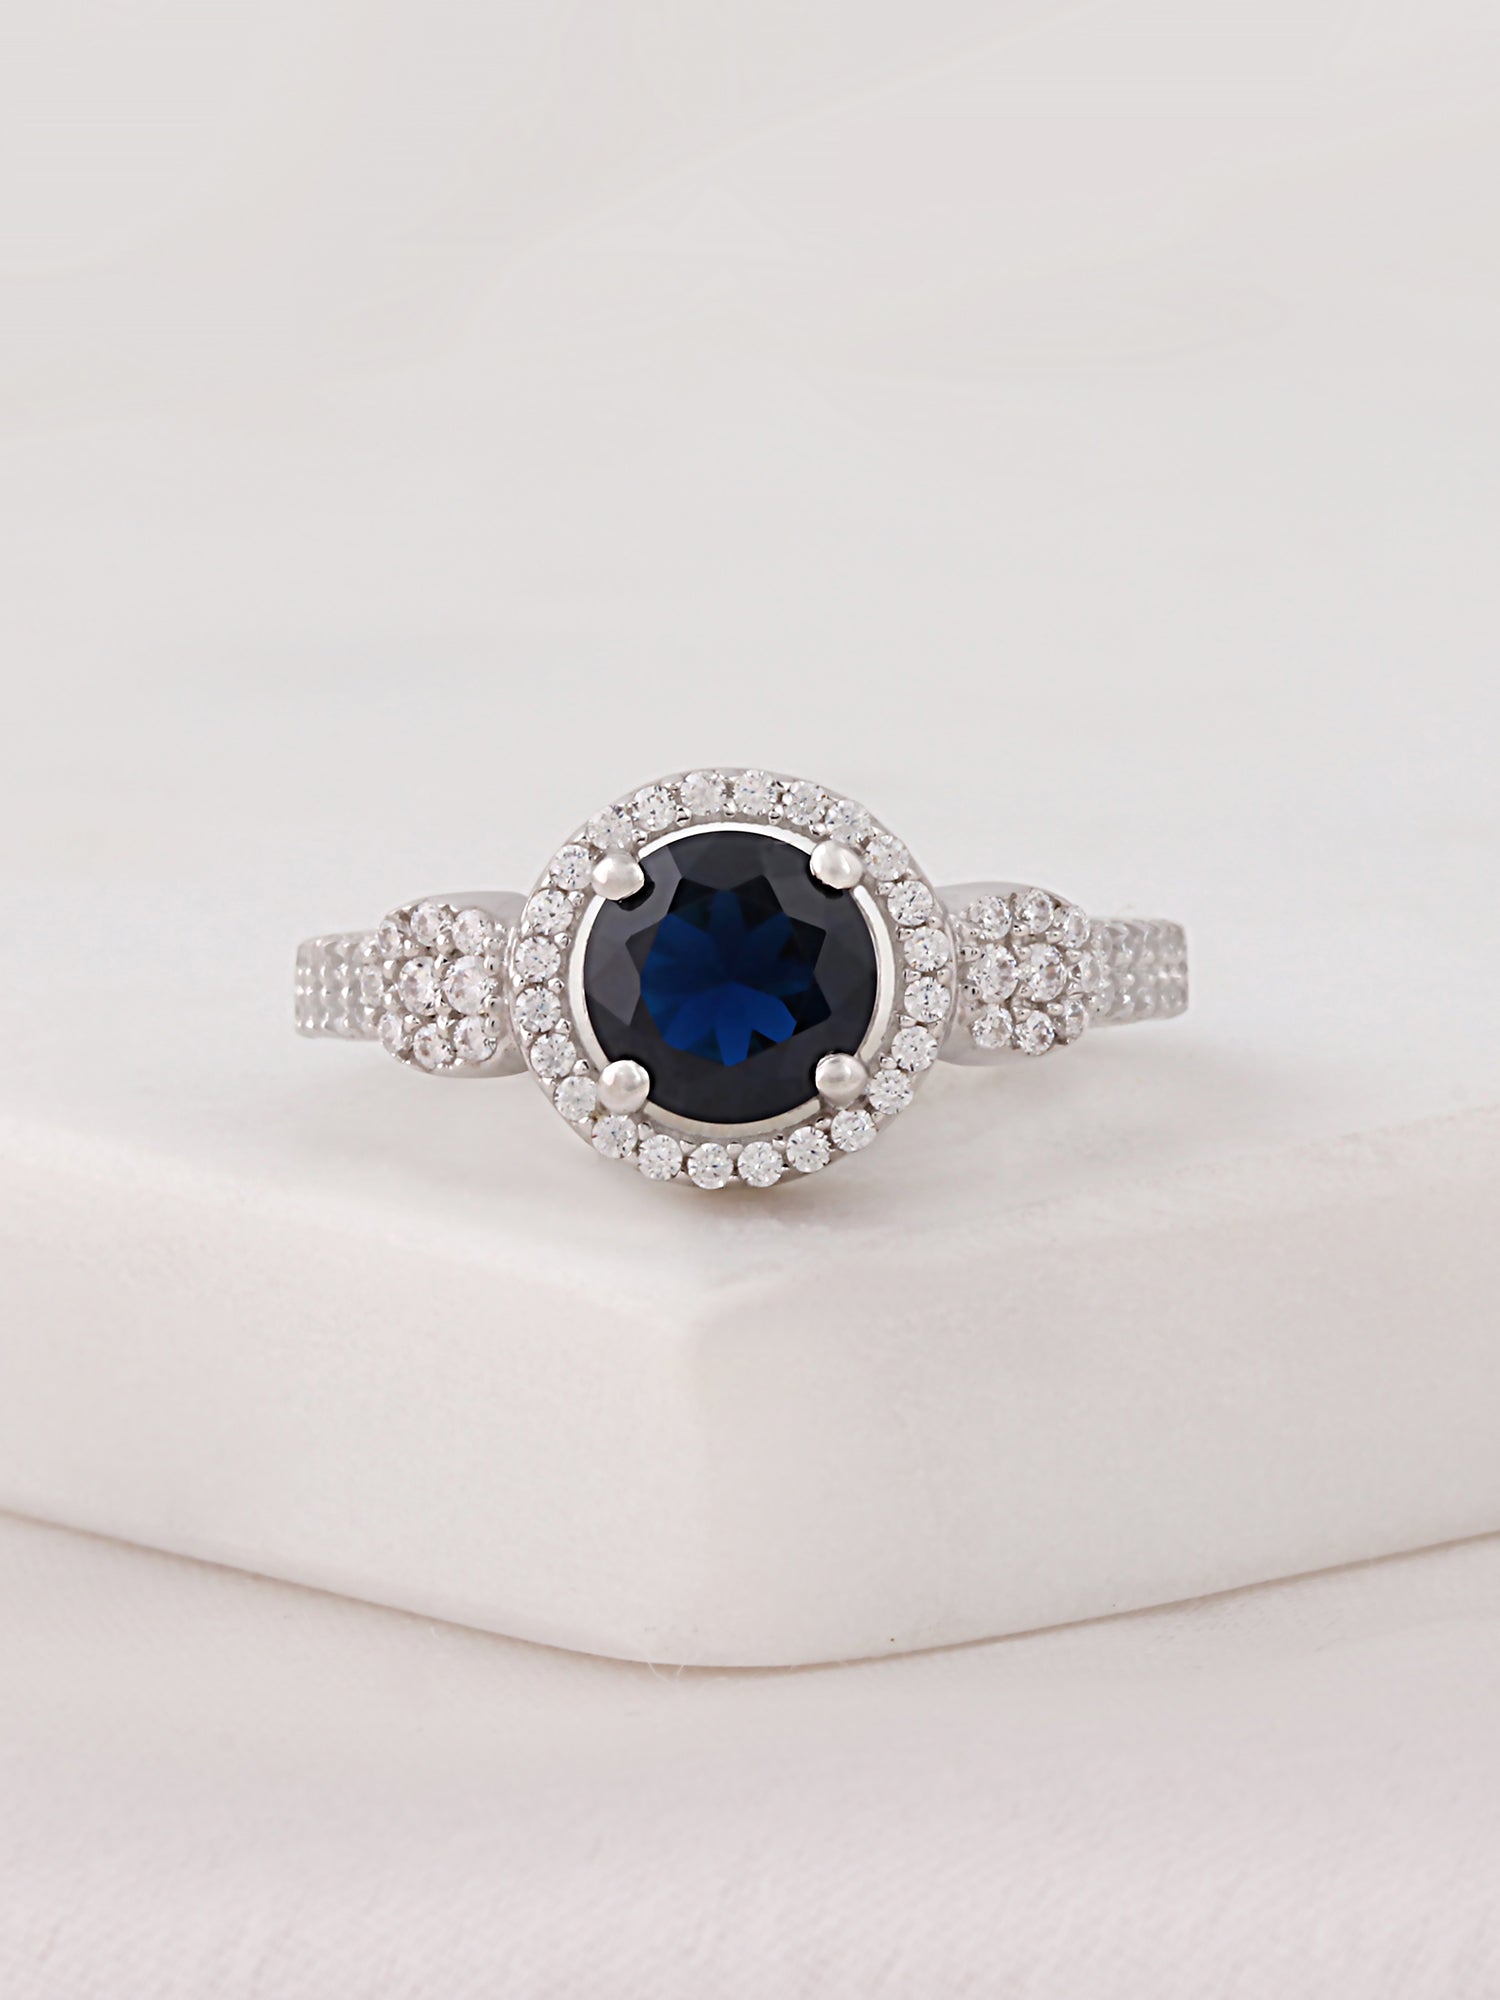 DEAL OF THE MONTH BLUE SAPPHIRE LUSTER 925 SILVER RING FOR HER-8